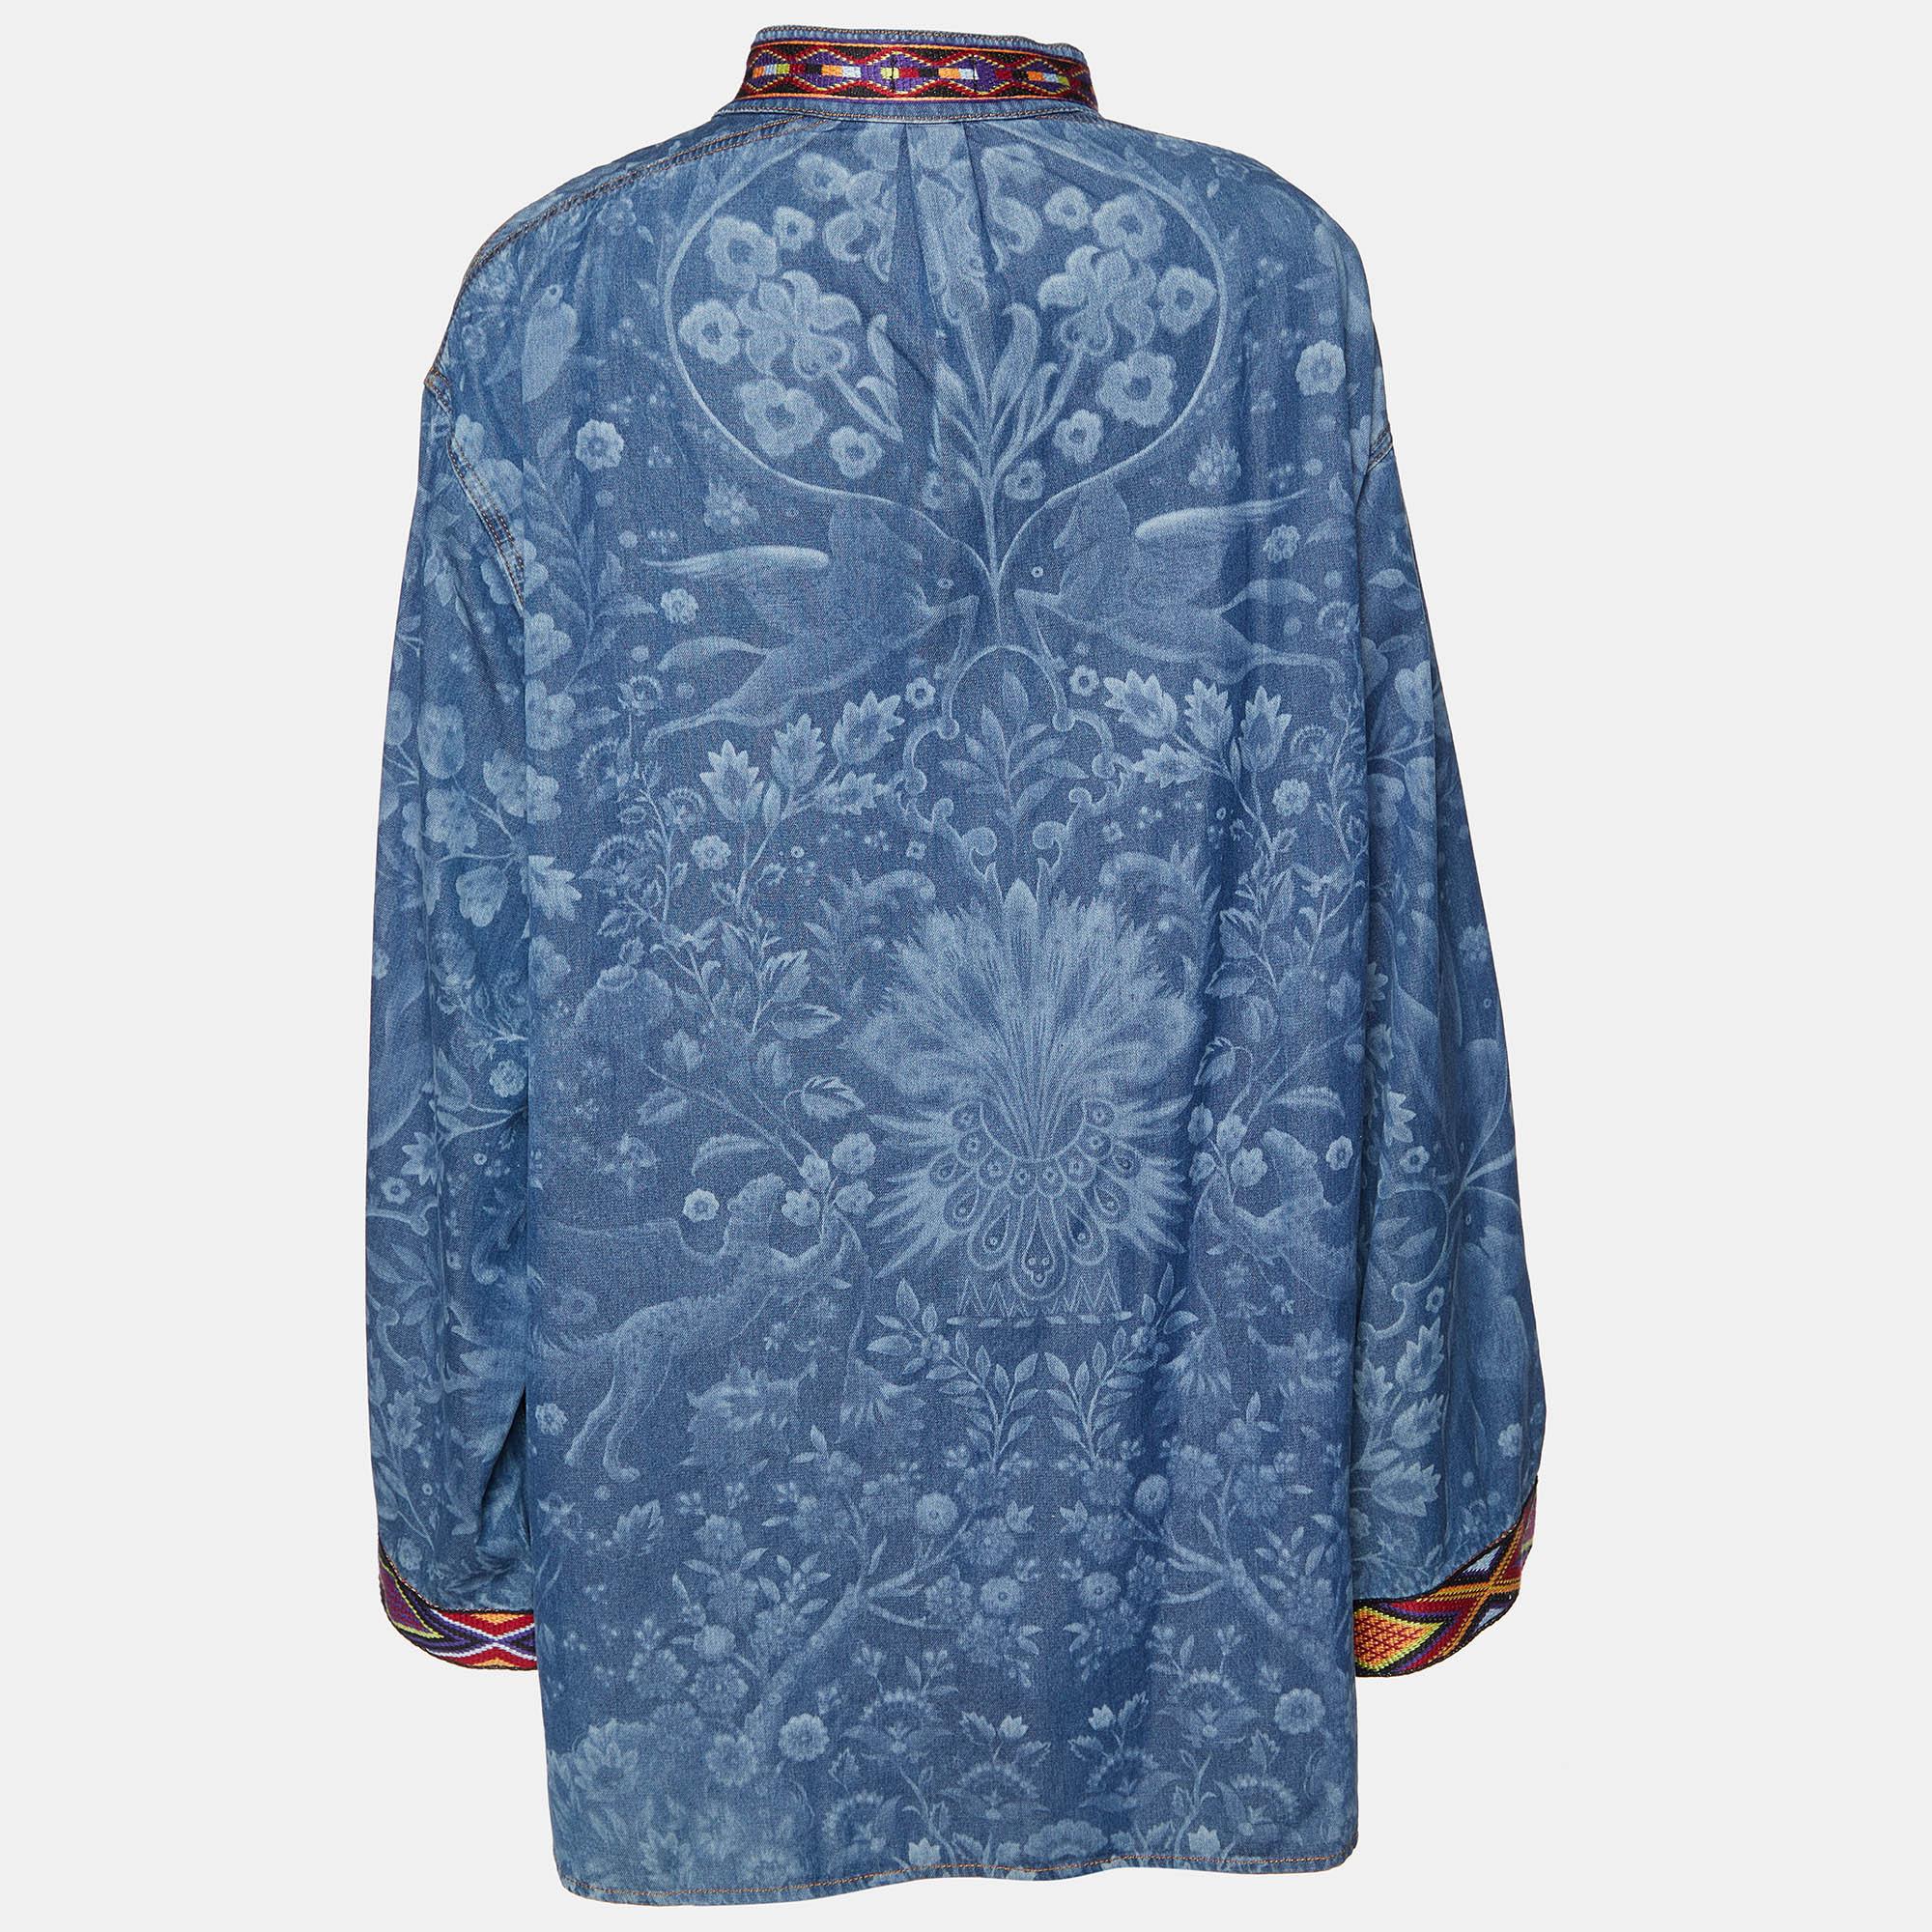 Experience the ethereal charm of the Etro tunic. Crafted with intricate detail, this garment boasts a celestial-inspired print reminiscent of starlit skies. The lace-up design adds a touch of allure while maintaining a casual yet refined aesthetic,